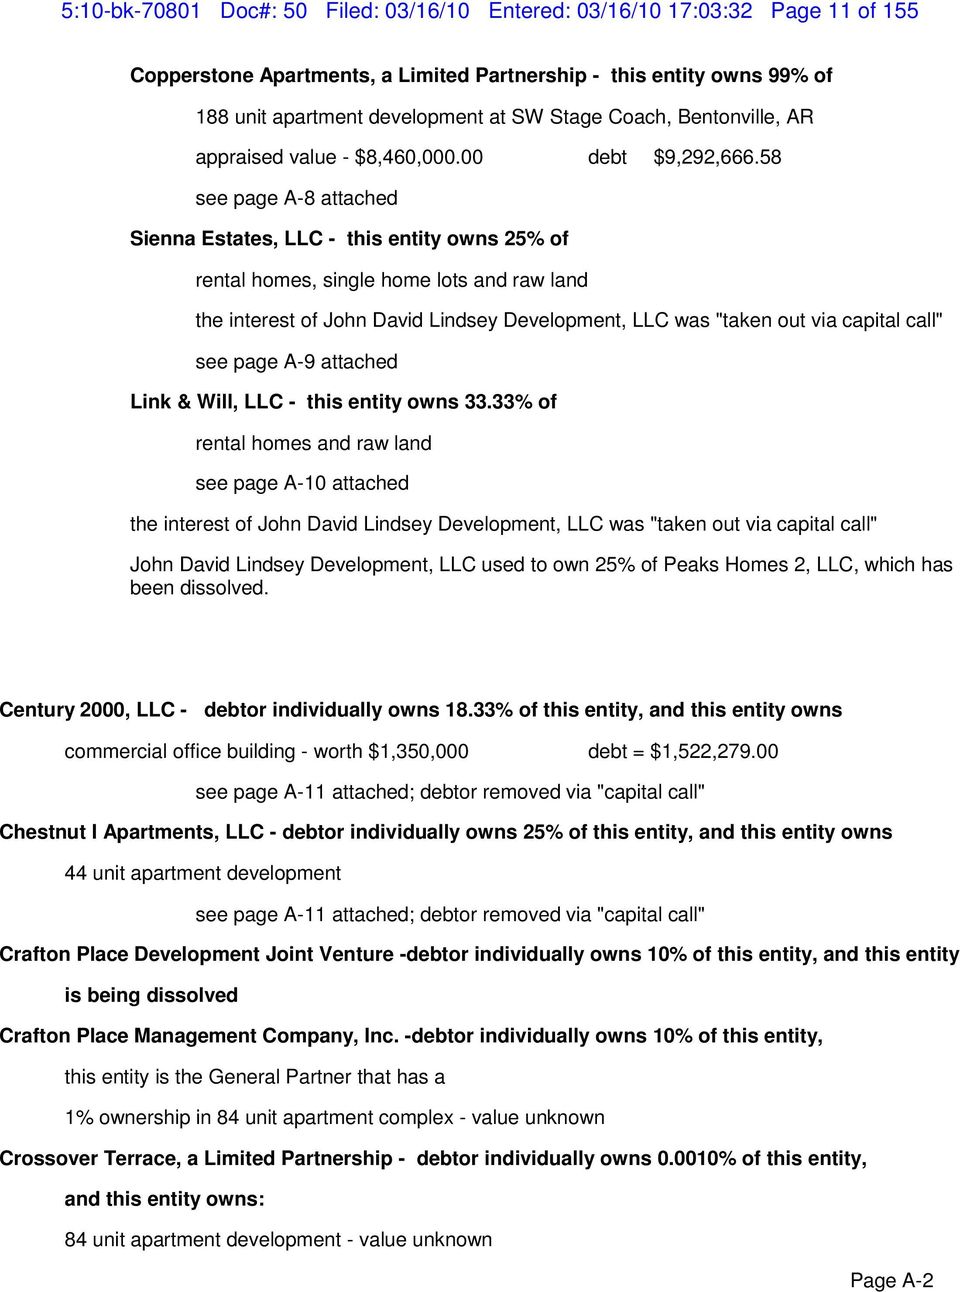 58 see page 8 attached ienna states this entity owns 25% of rental homes single home lots and raw land the interest of ohn avid indsey evelopment was "taken out via capital call" see page 9 attached